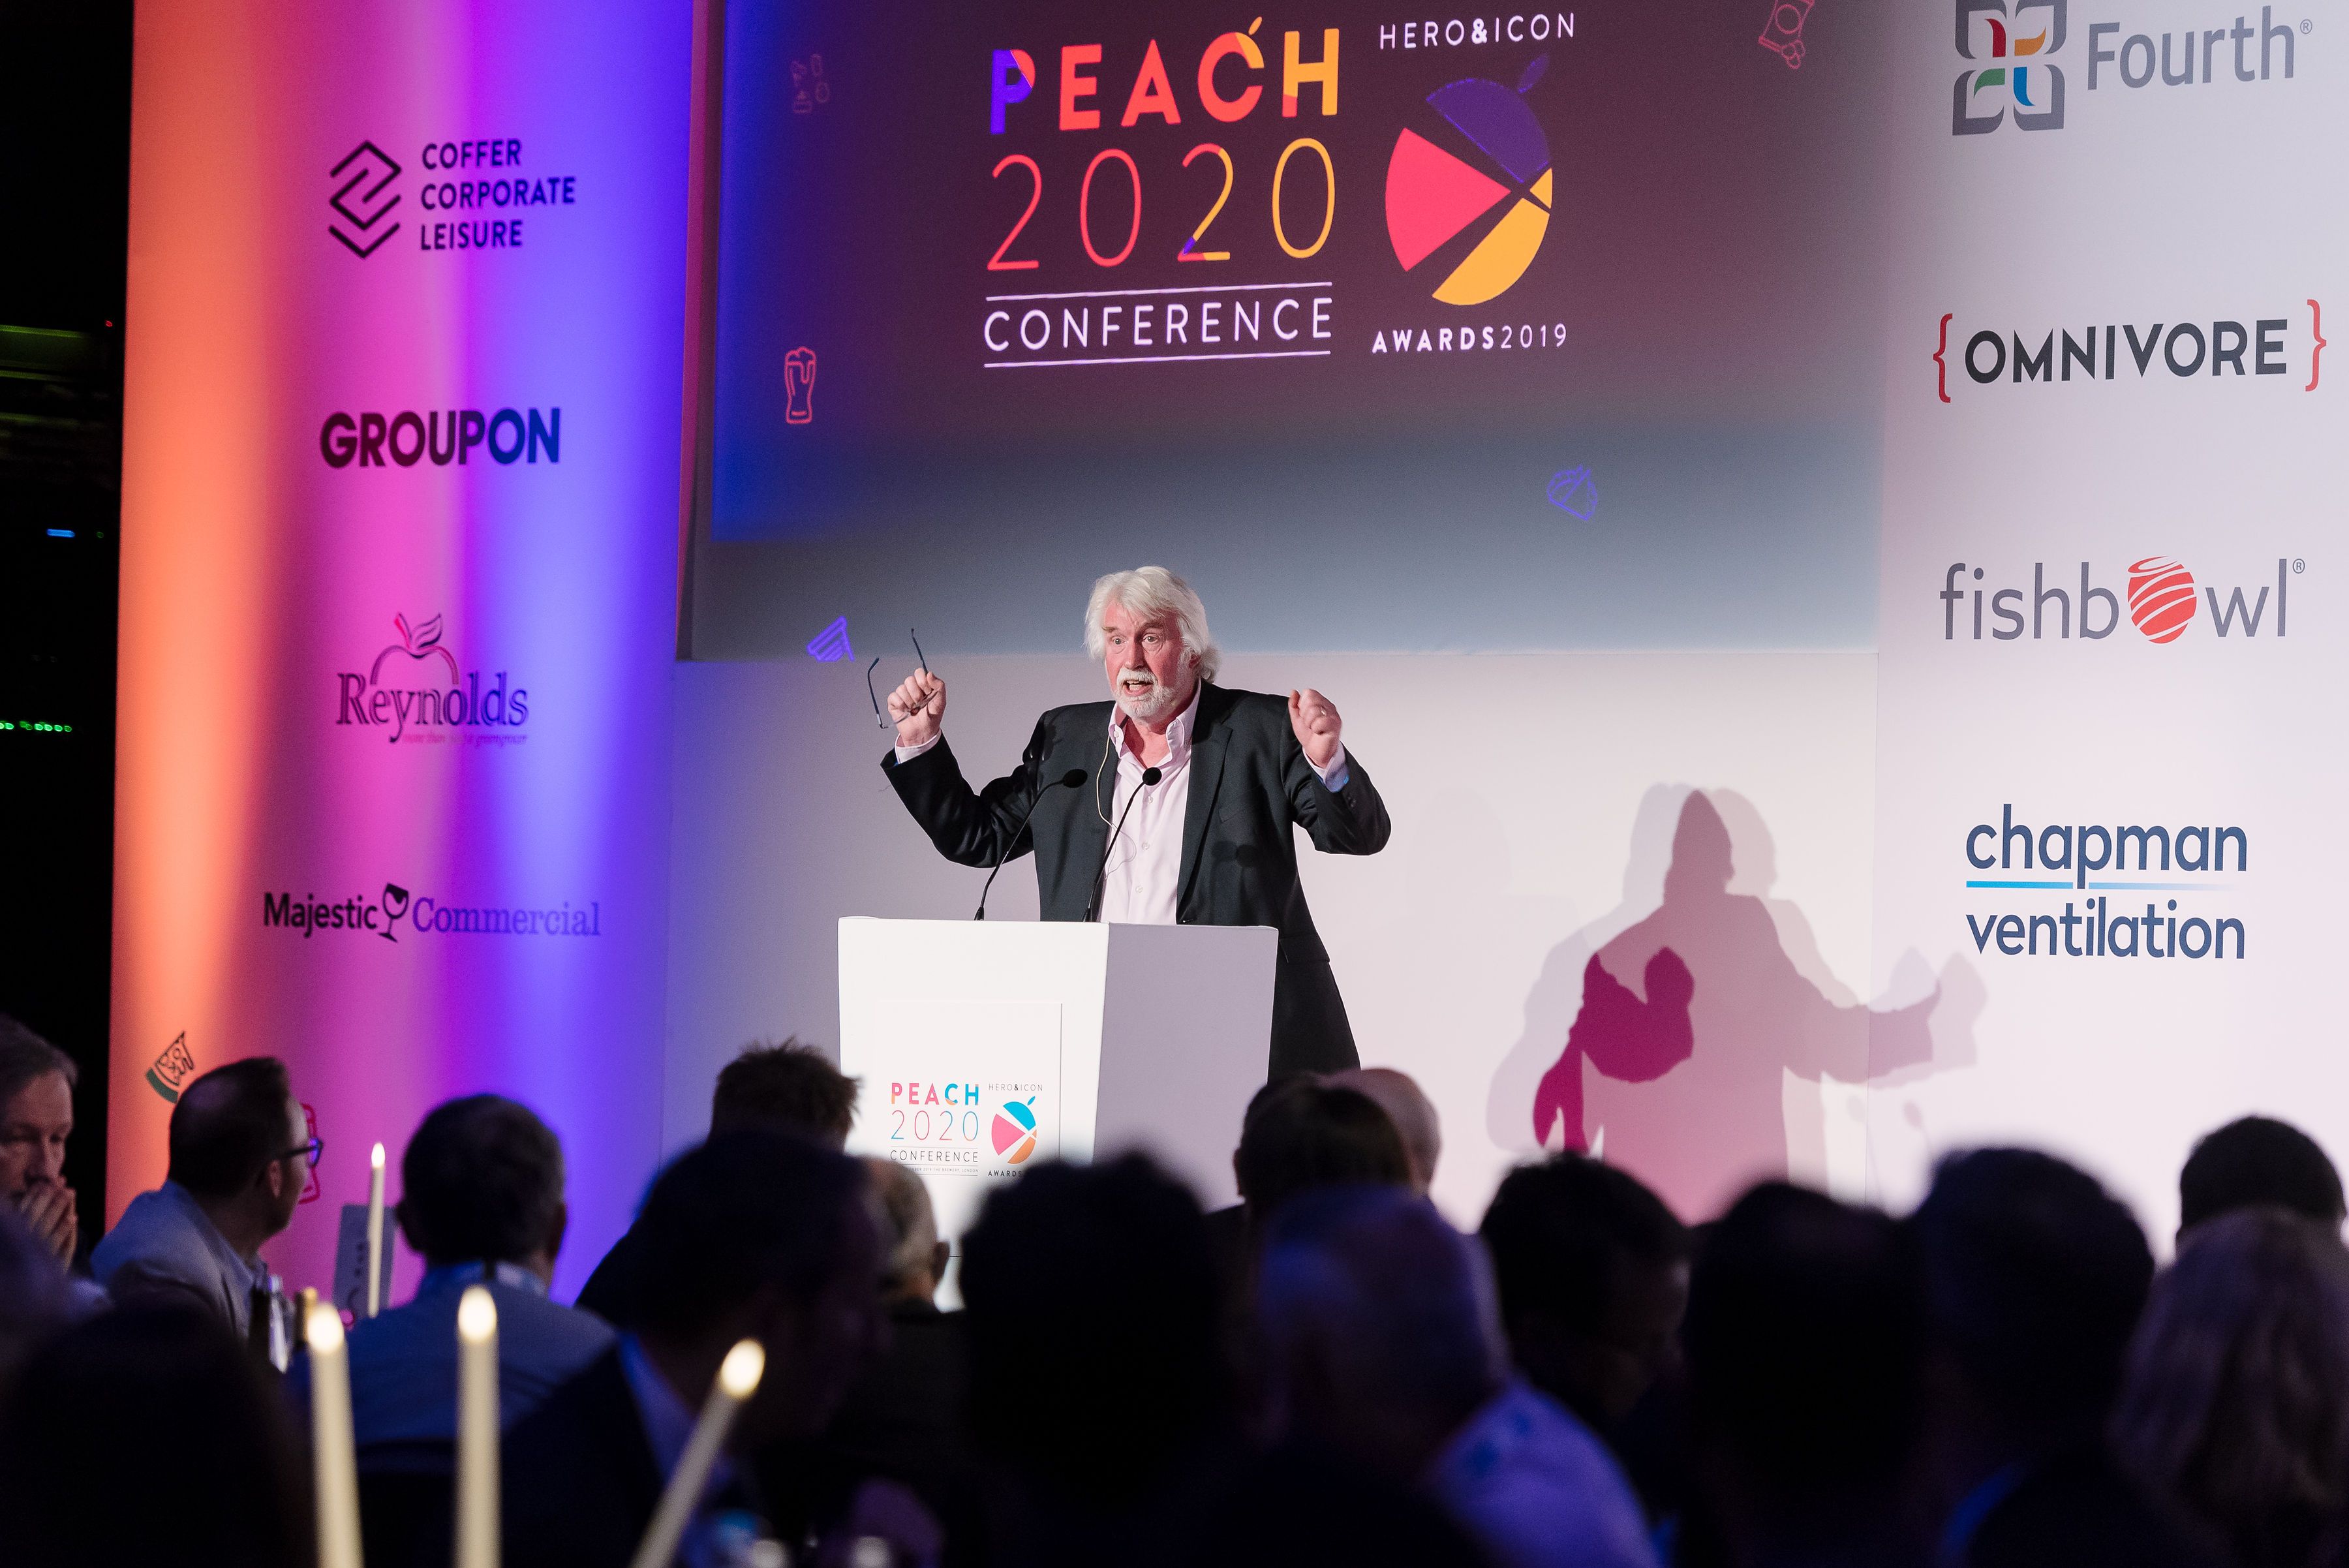 Peach 20/20 reveals shortlists for Hero & Icon Awards